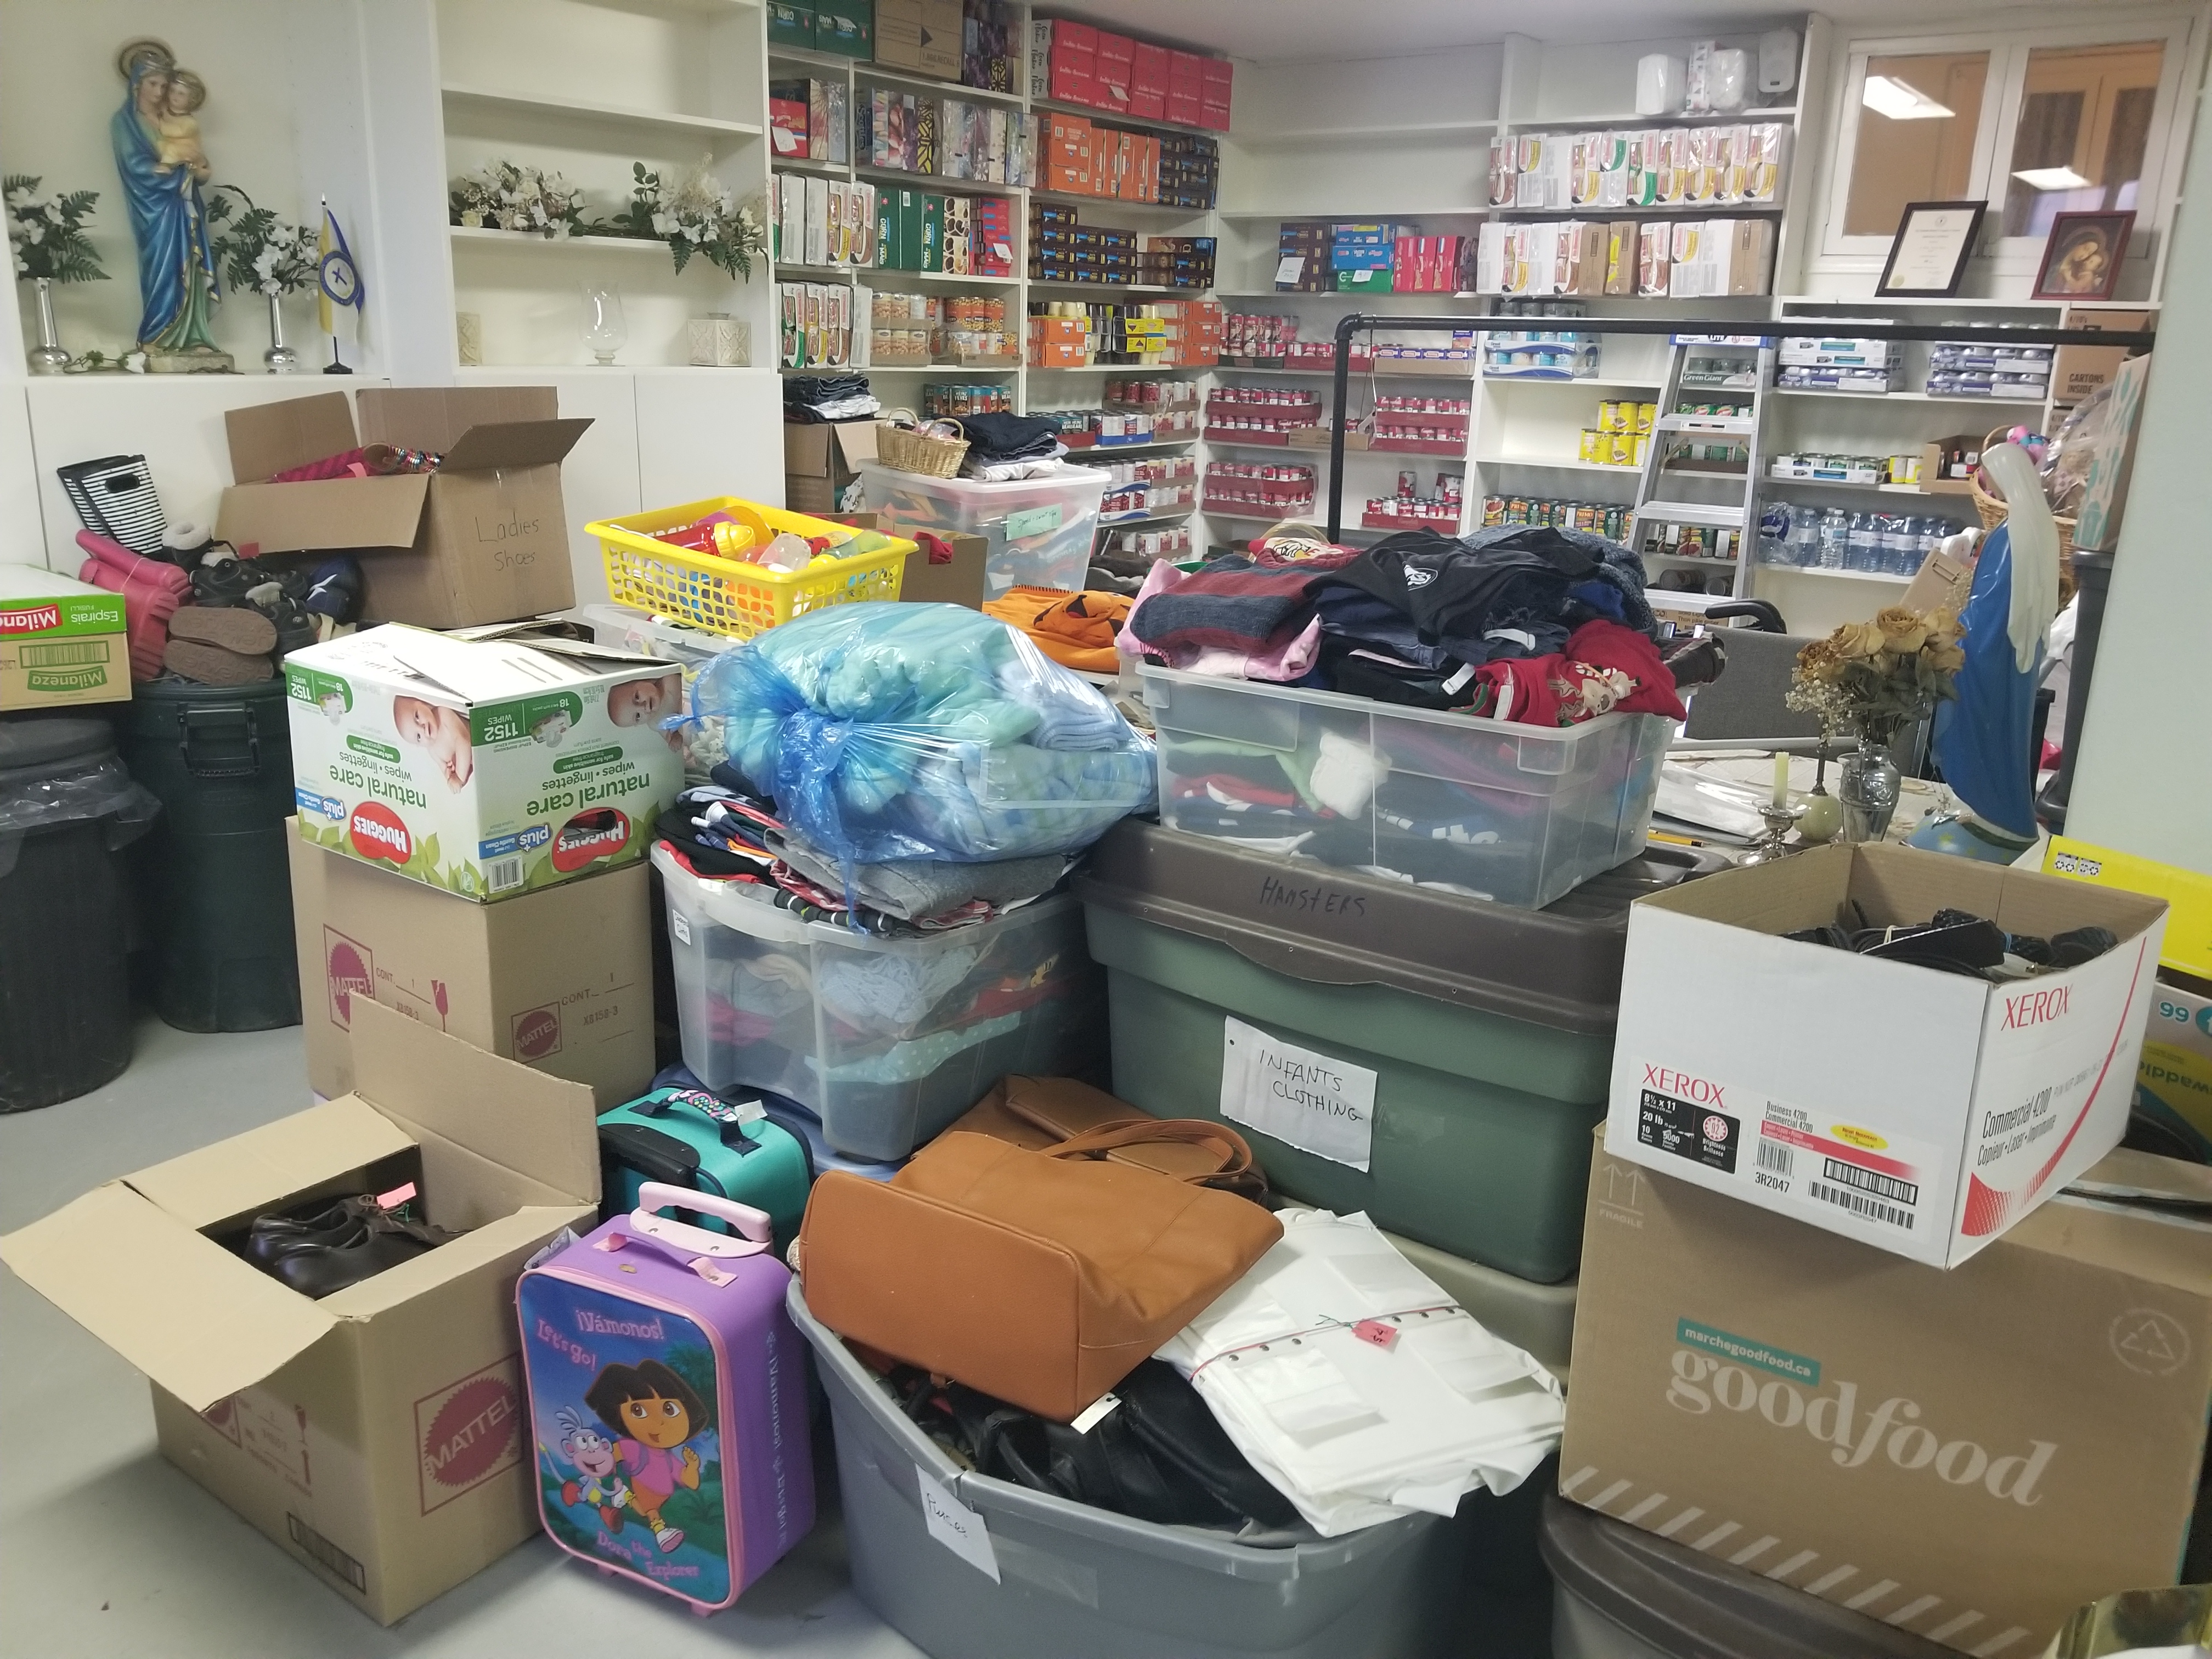 Shoes and school supplies for donation at church basement